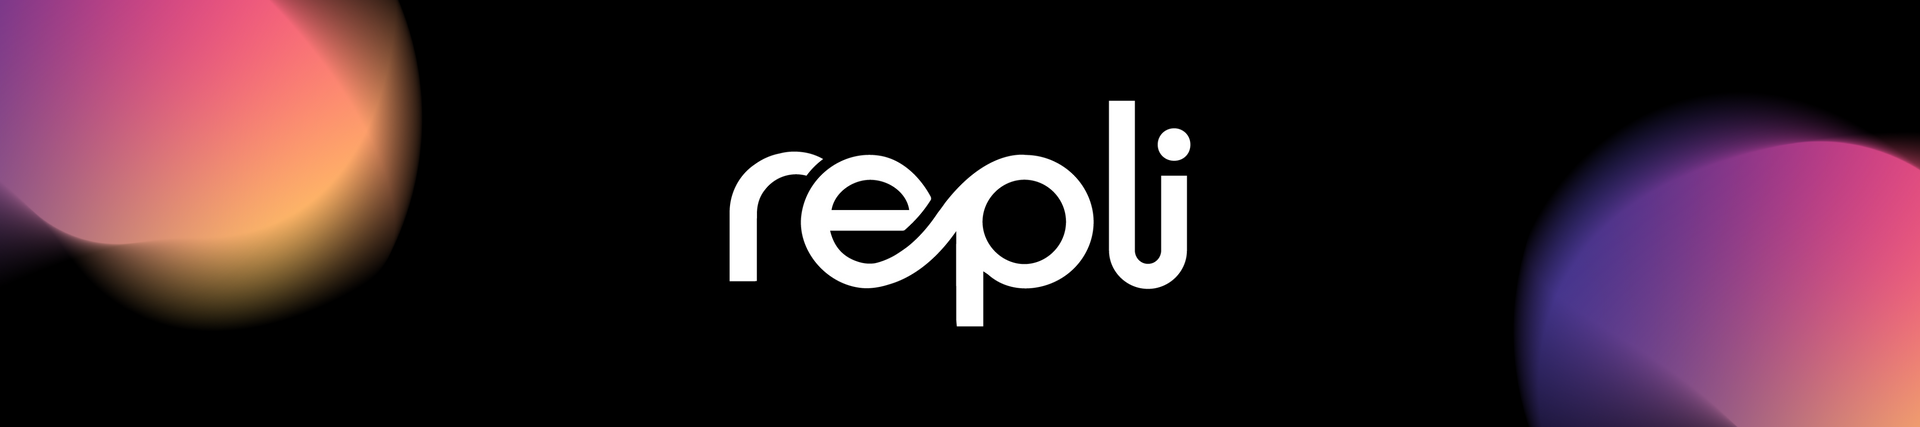 Repli Unveils Major Rebrand and Brings Its Culture and Technology to the Forefront